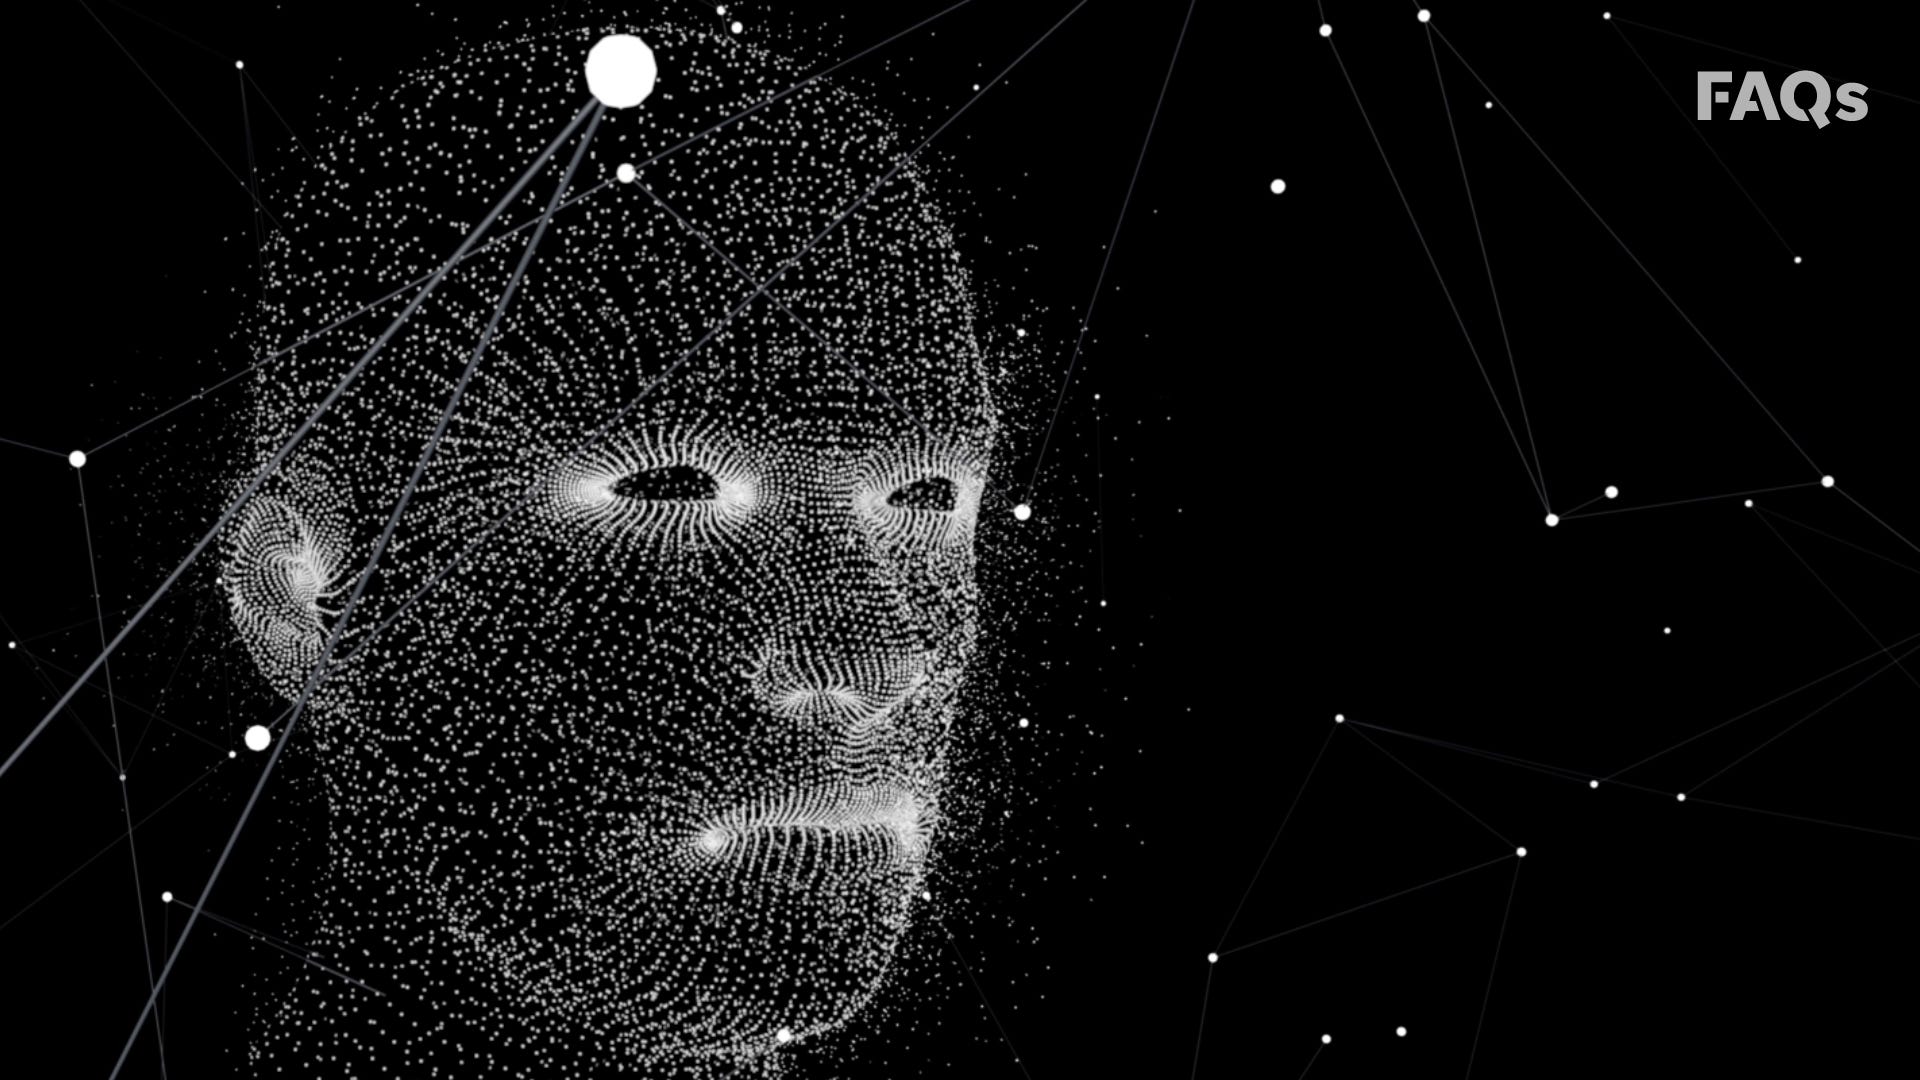 Police technology and surveillance: The politics of facial recognition